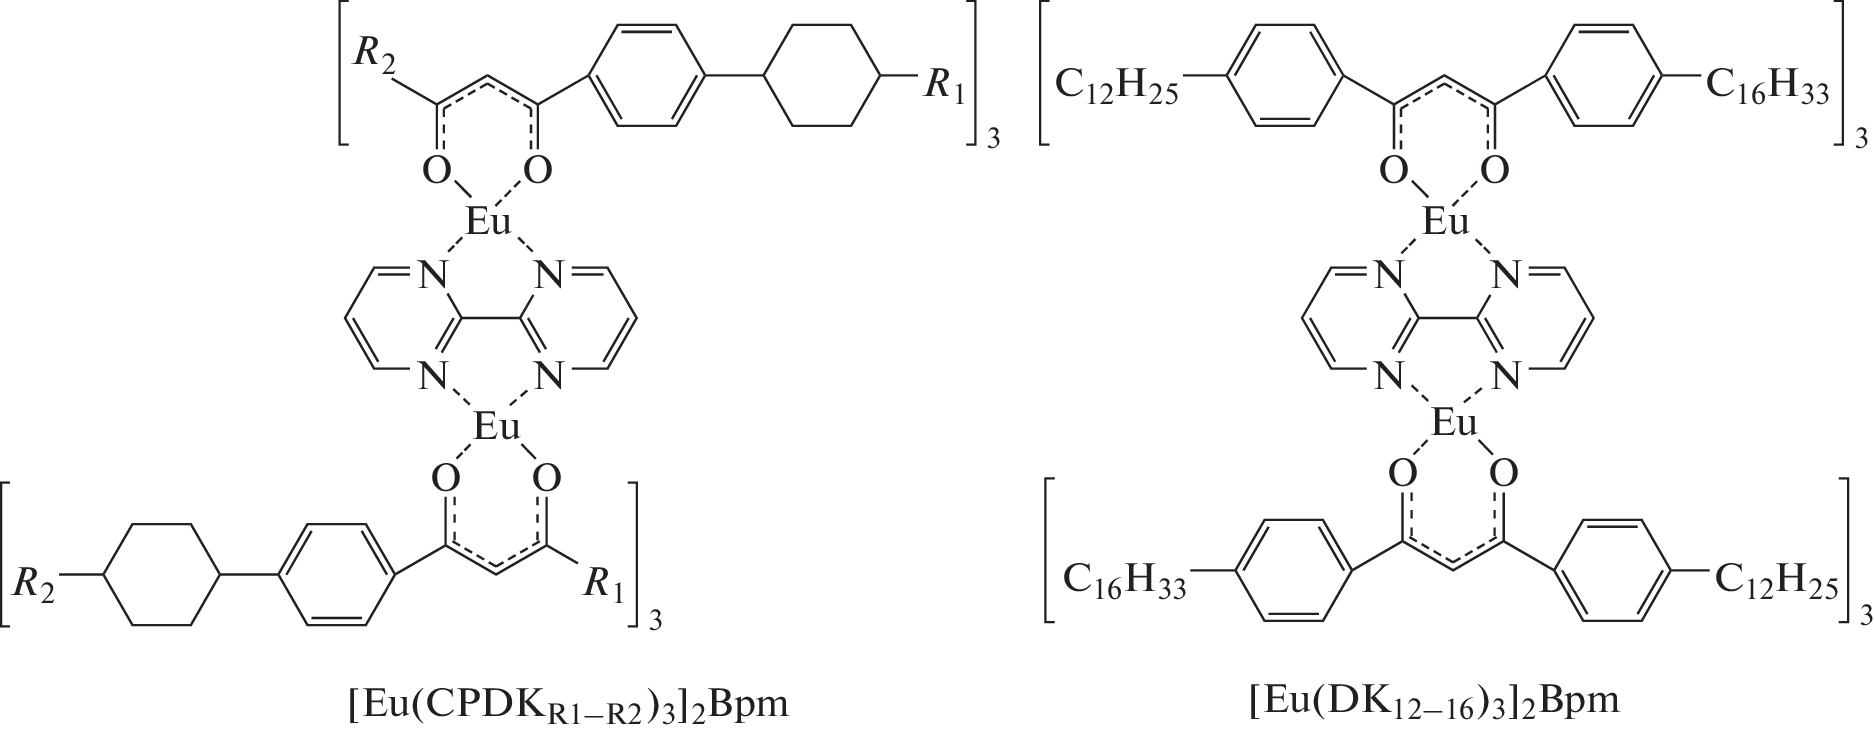 Evaluation of Luminescent and Mesogenic Properties of Europium(III) Binuclear Complexes According to Quantum Chemical Calculations